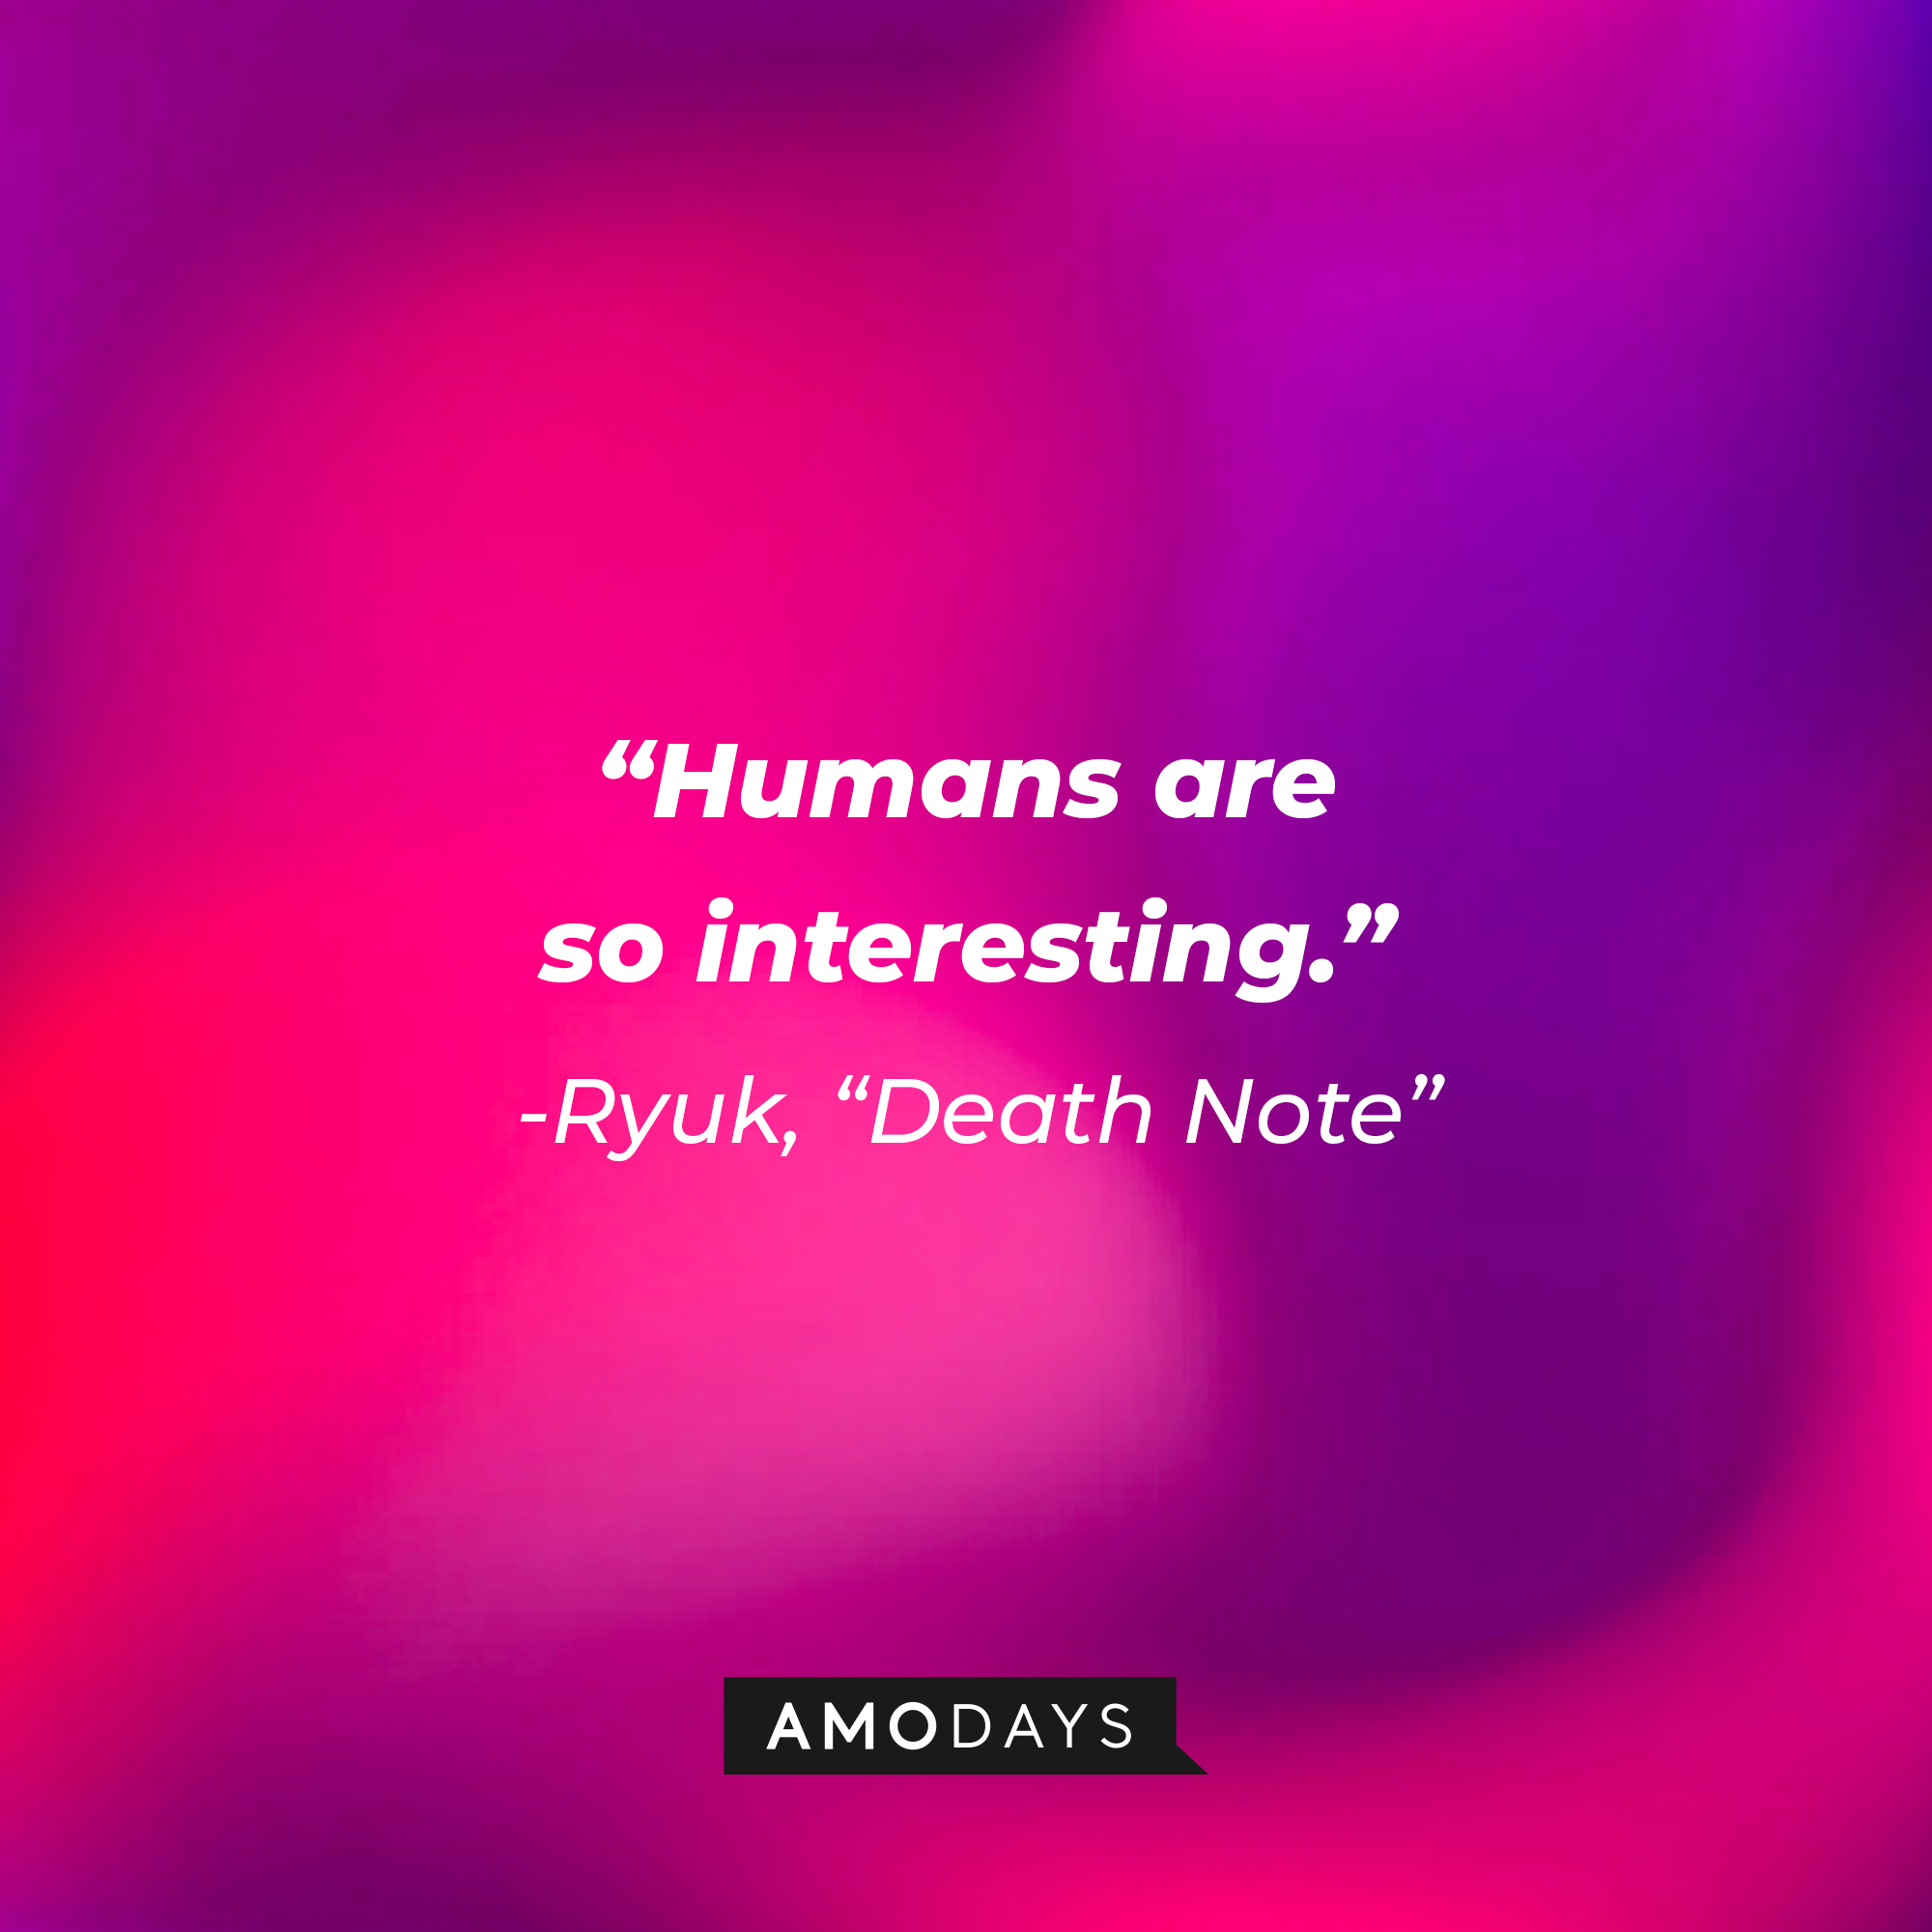 Ryuk's quote from "Death Note:" "Humans are so interesting." | Source: AmoDays